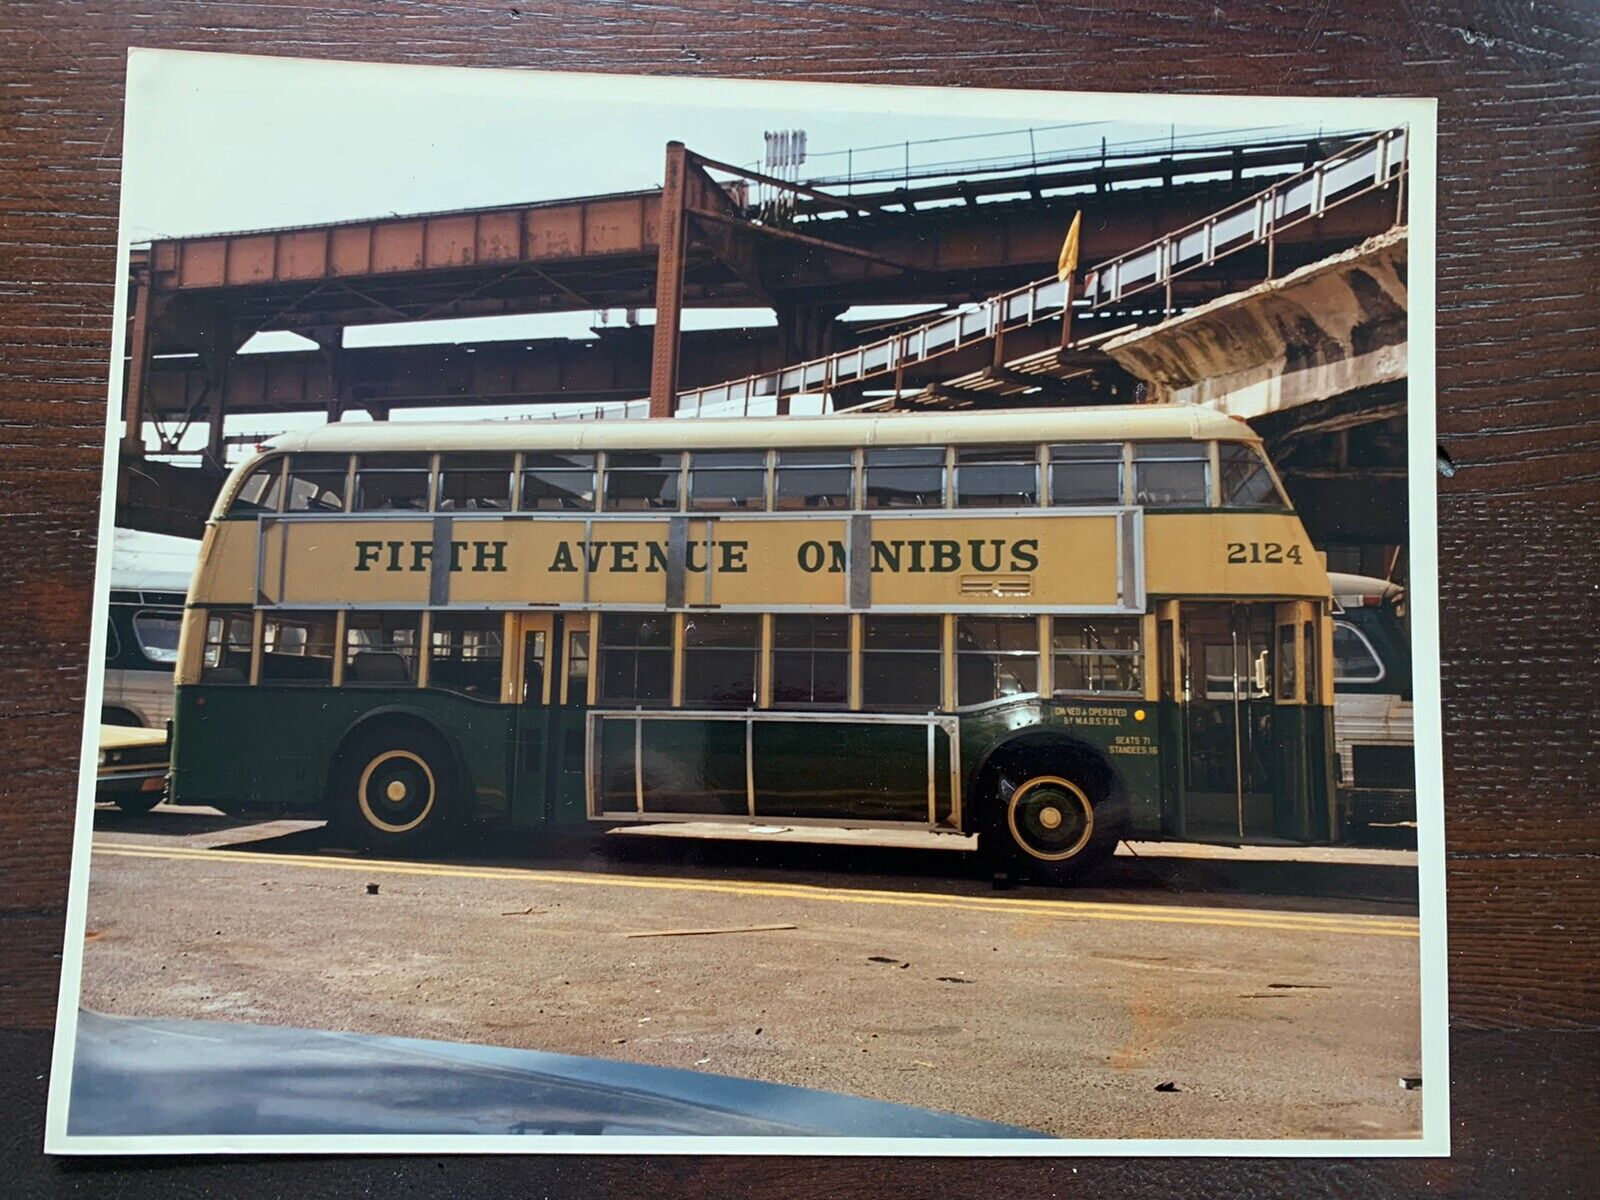 8X10 NY NYC DOUBLE DECKER BUS #2124 FIFTH AVENUE OMNIBUS ELEVATED SUBWAY LINES